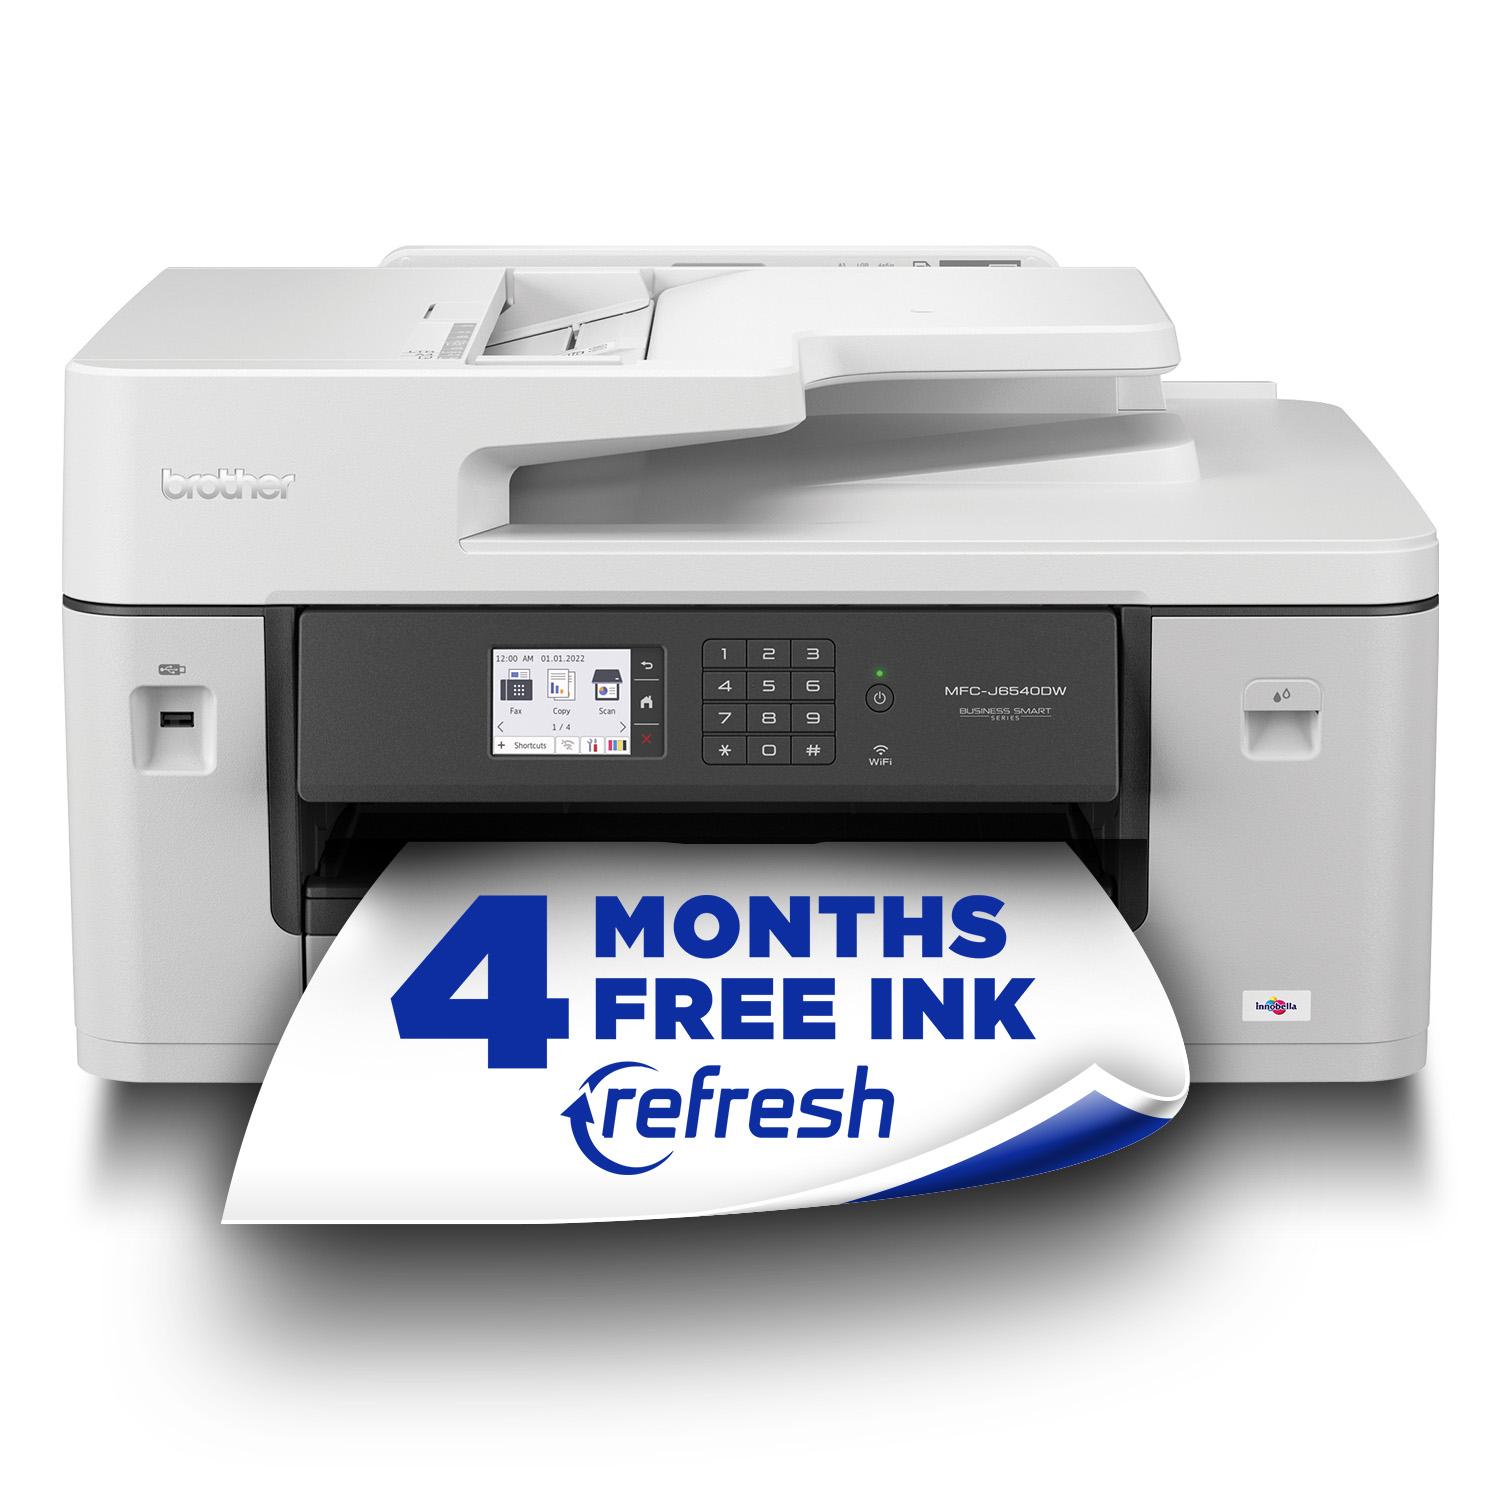 

Brother MFC-J6540DW Business Color Inkjet All-in-One Printer – print, scan, copy and fax up to 11"x17" (Ledger) size paper with Refresh